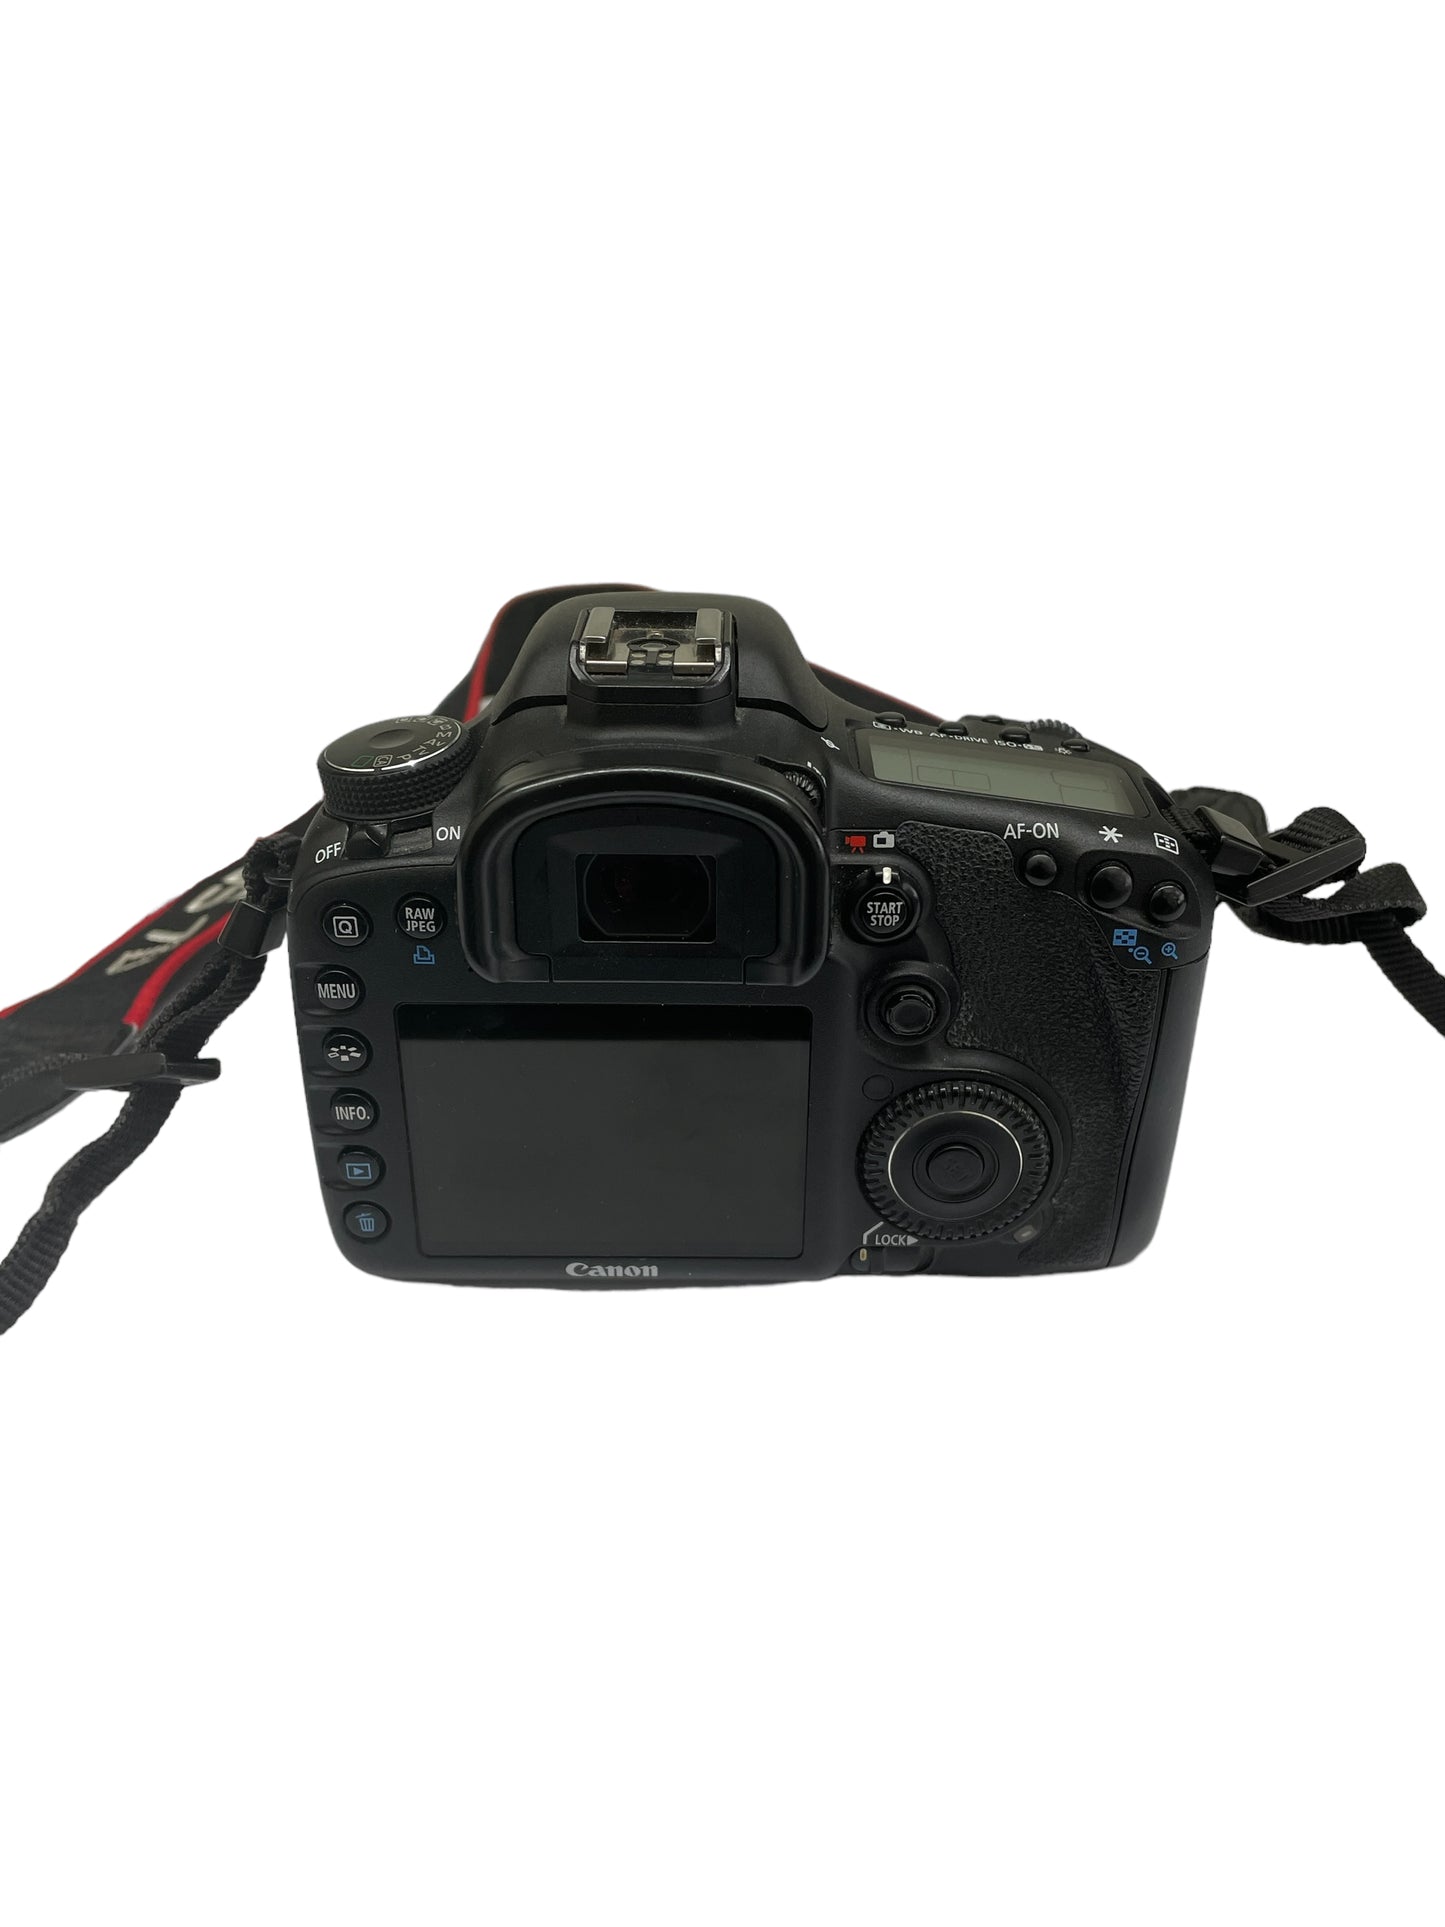 Canon EOS 7D DS126251 Camera Body Only